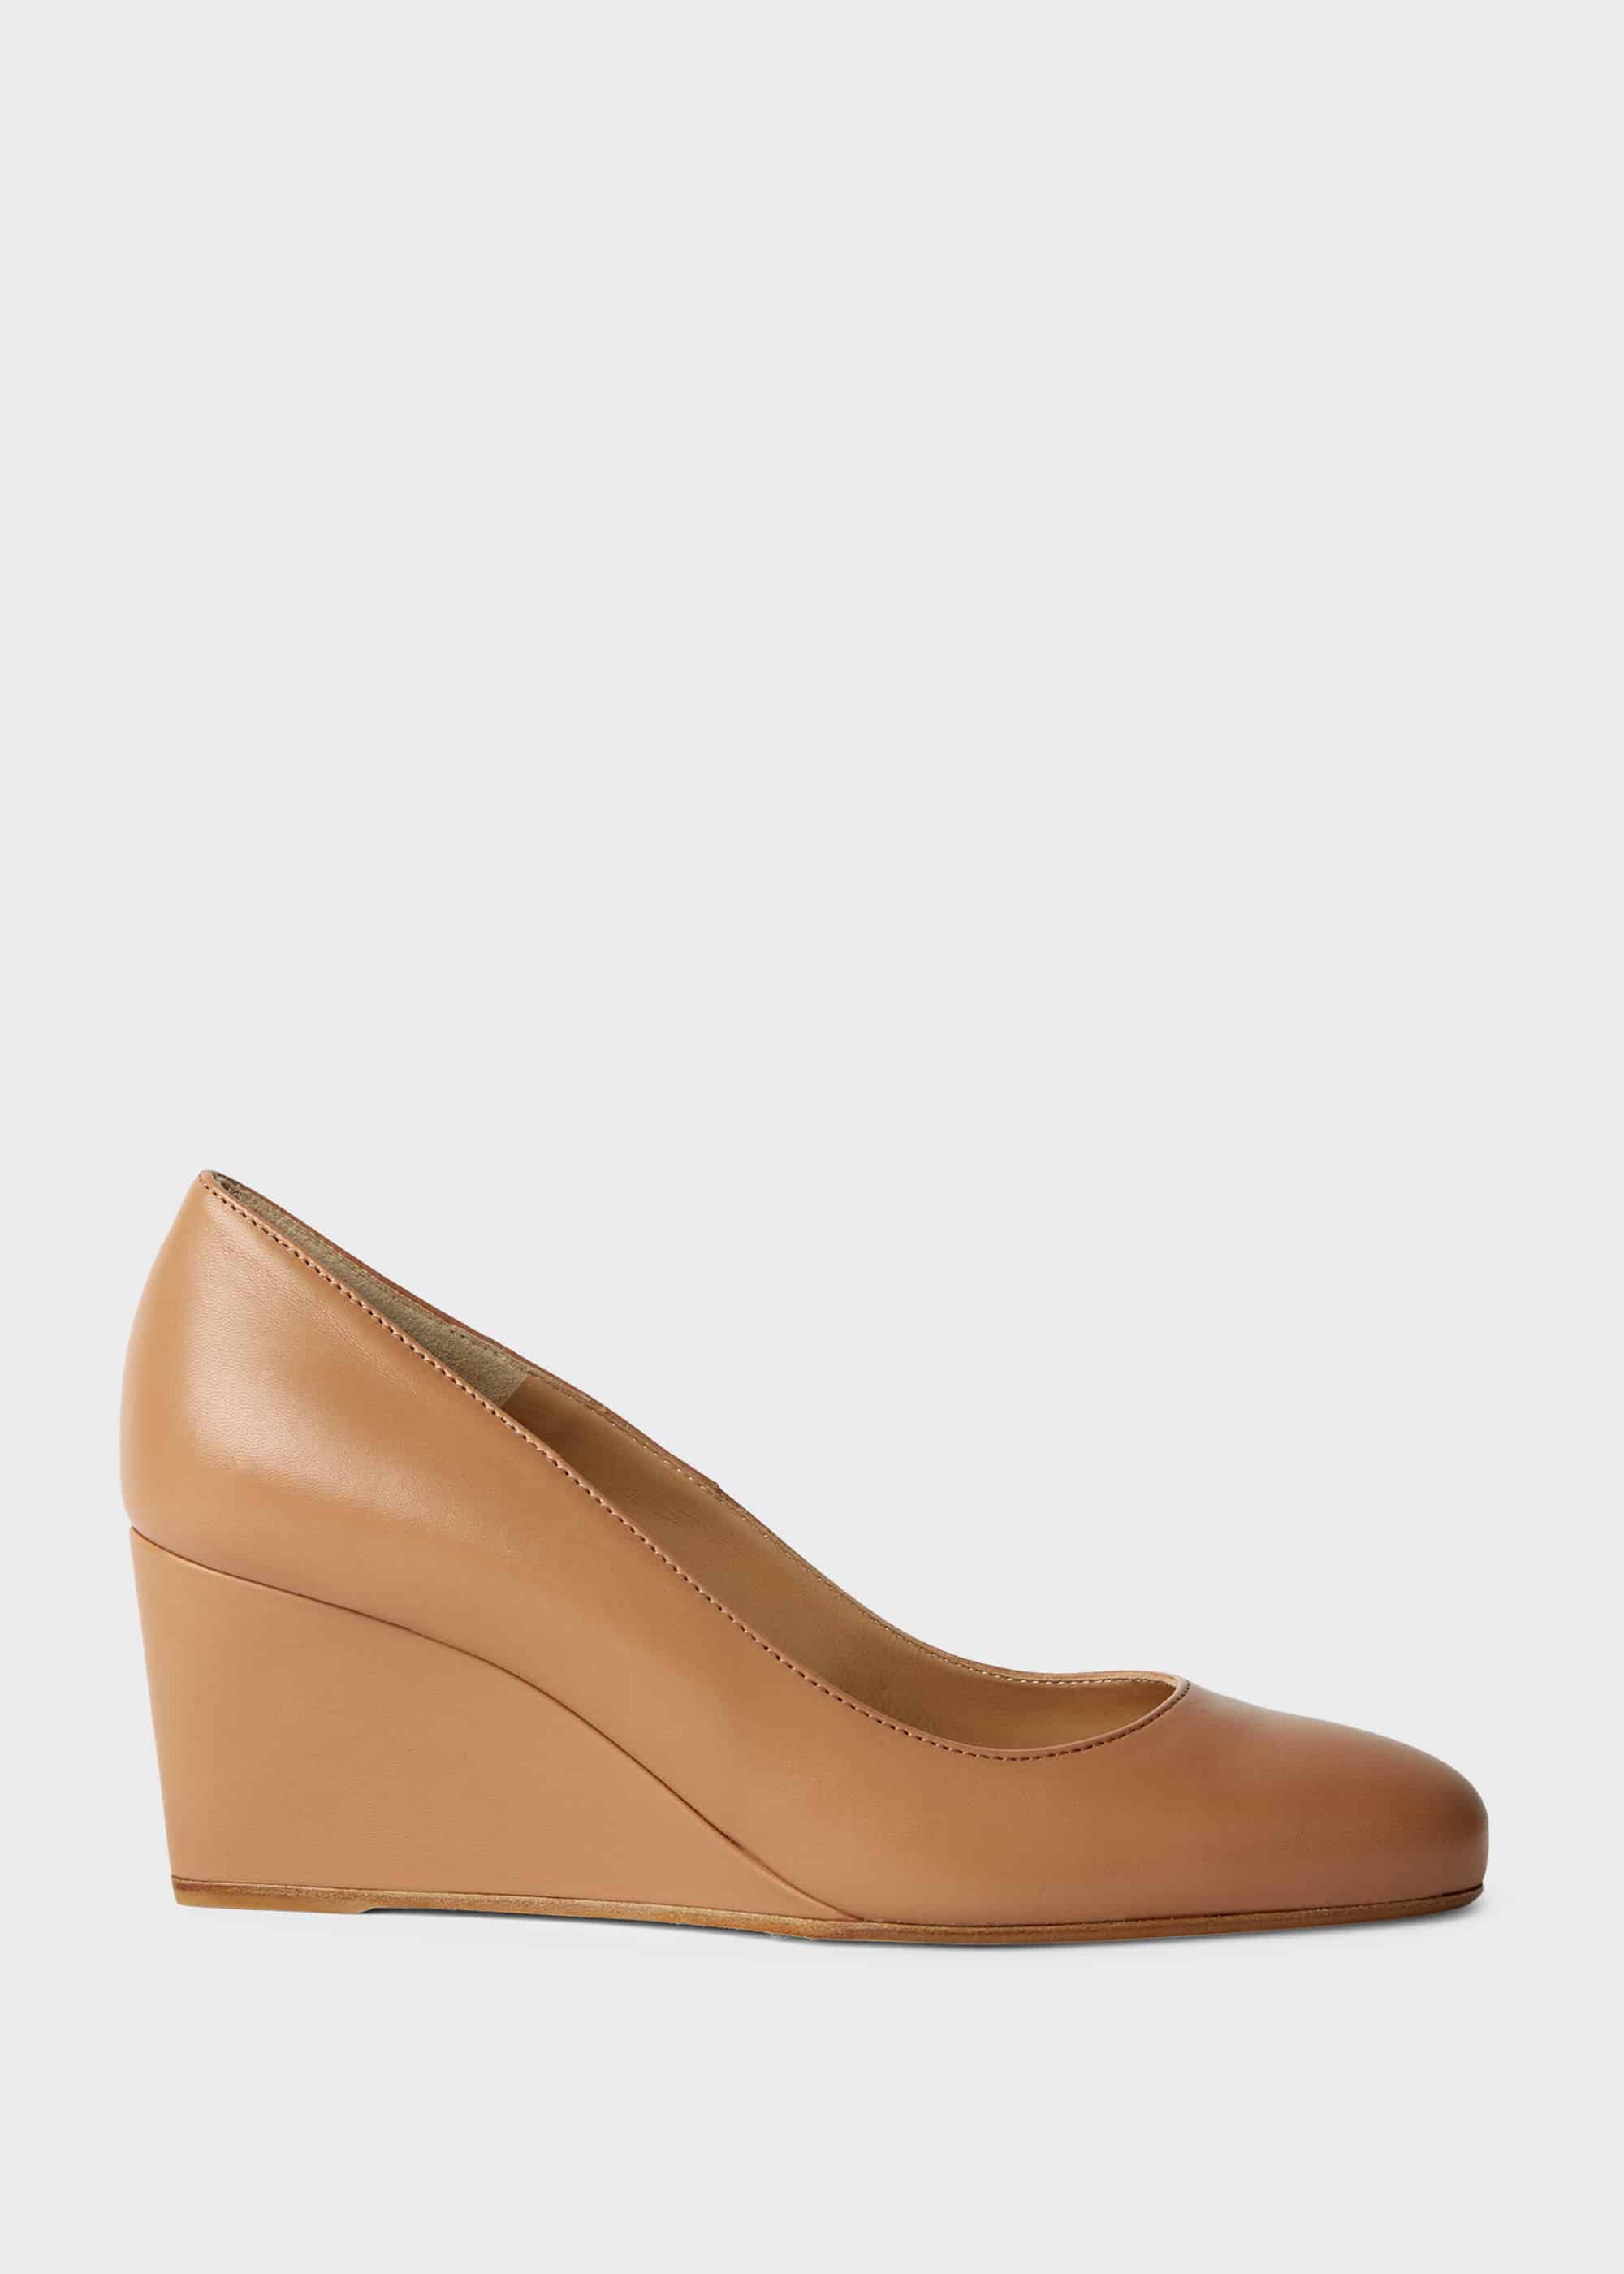 wedge dress shoes